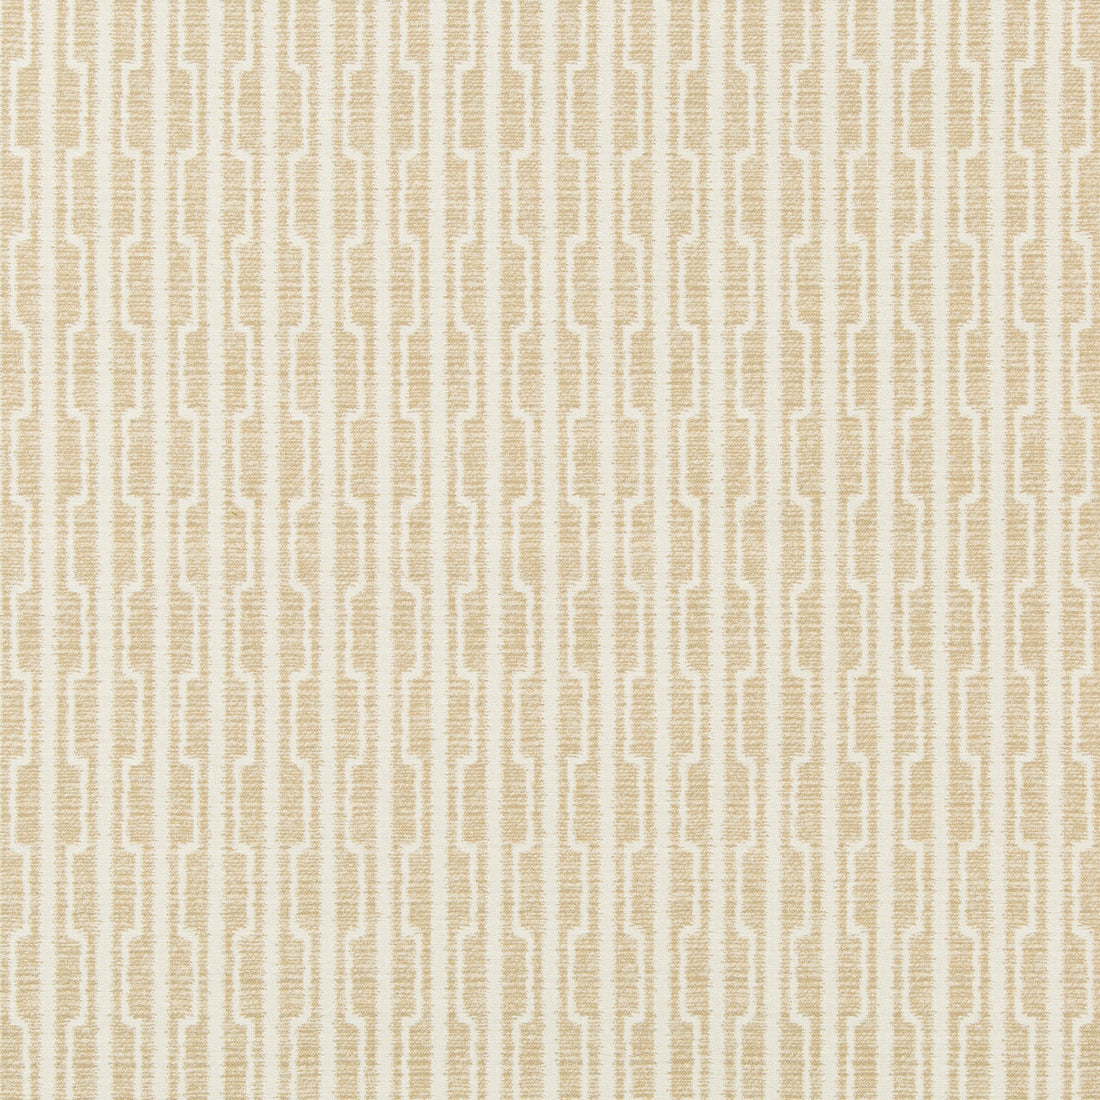 Kravet Design fabric in 36084-1601 color - pattern 36084.1601.0 - by Kravet Design in the Inside Out Performance Fabrics collection